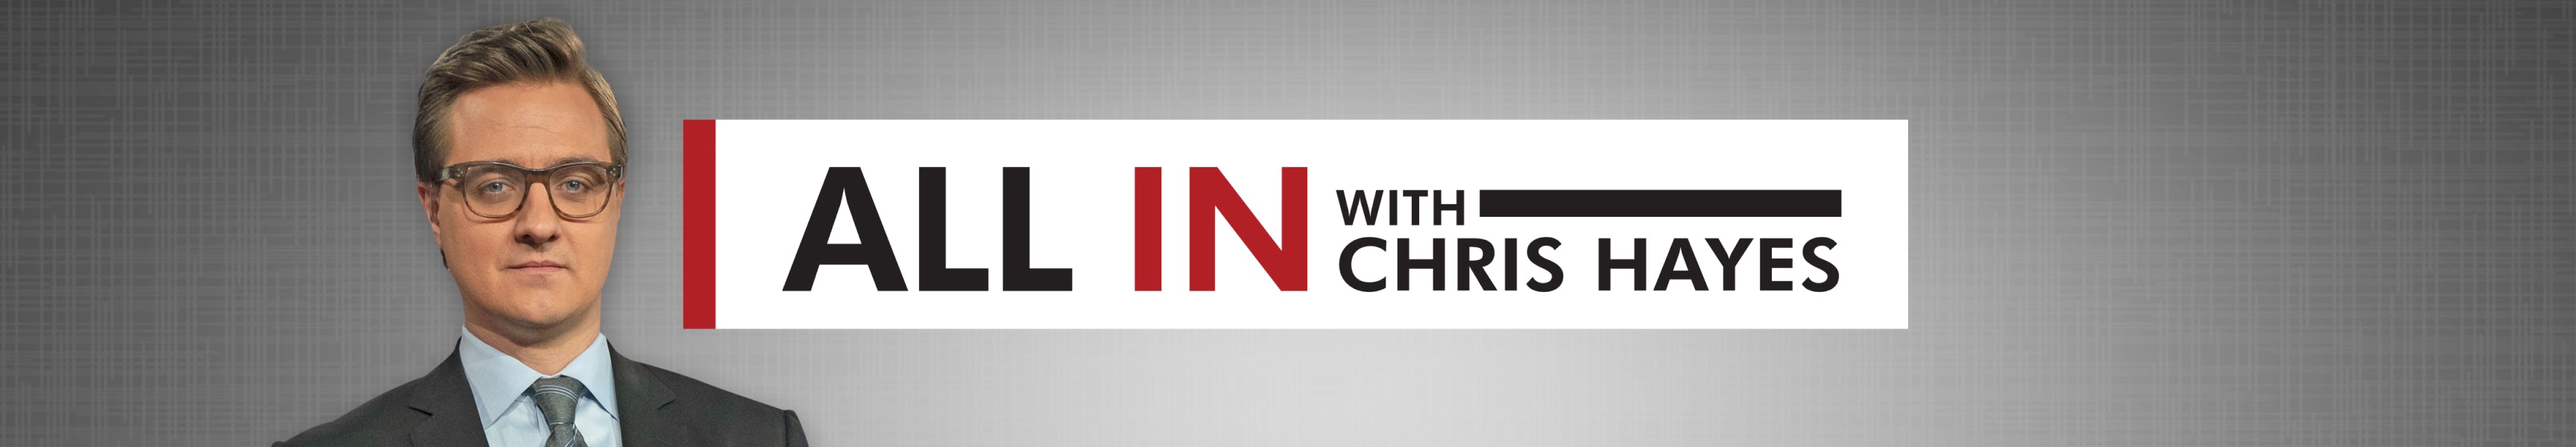 All In with Chris Hayes 10th Anniversary